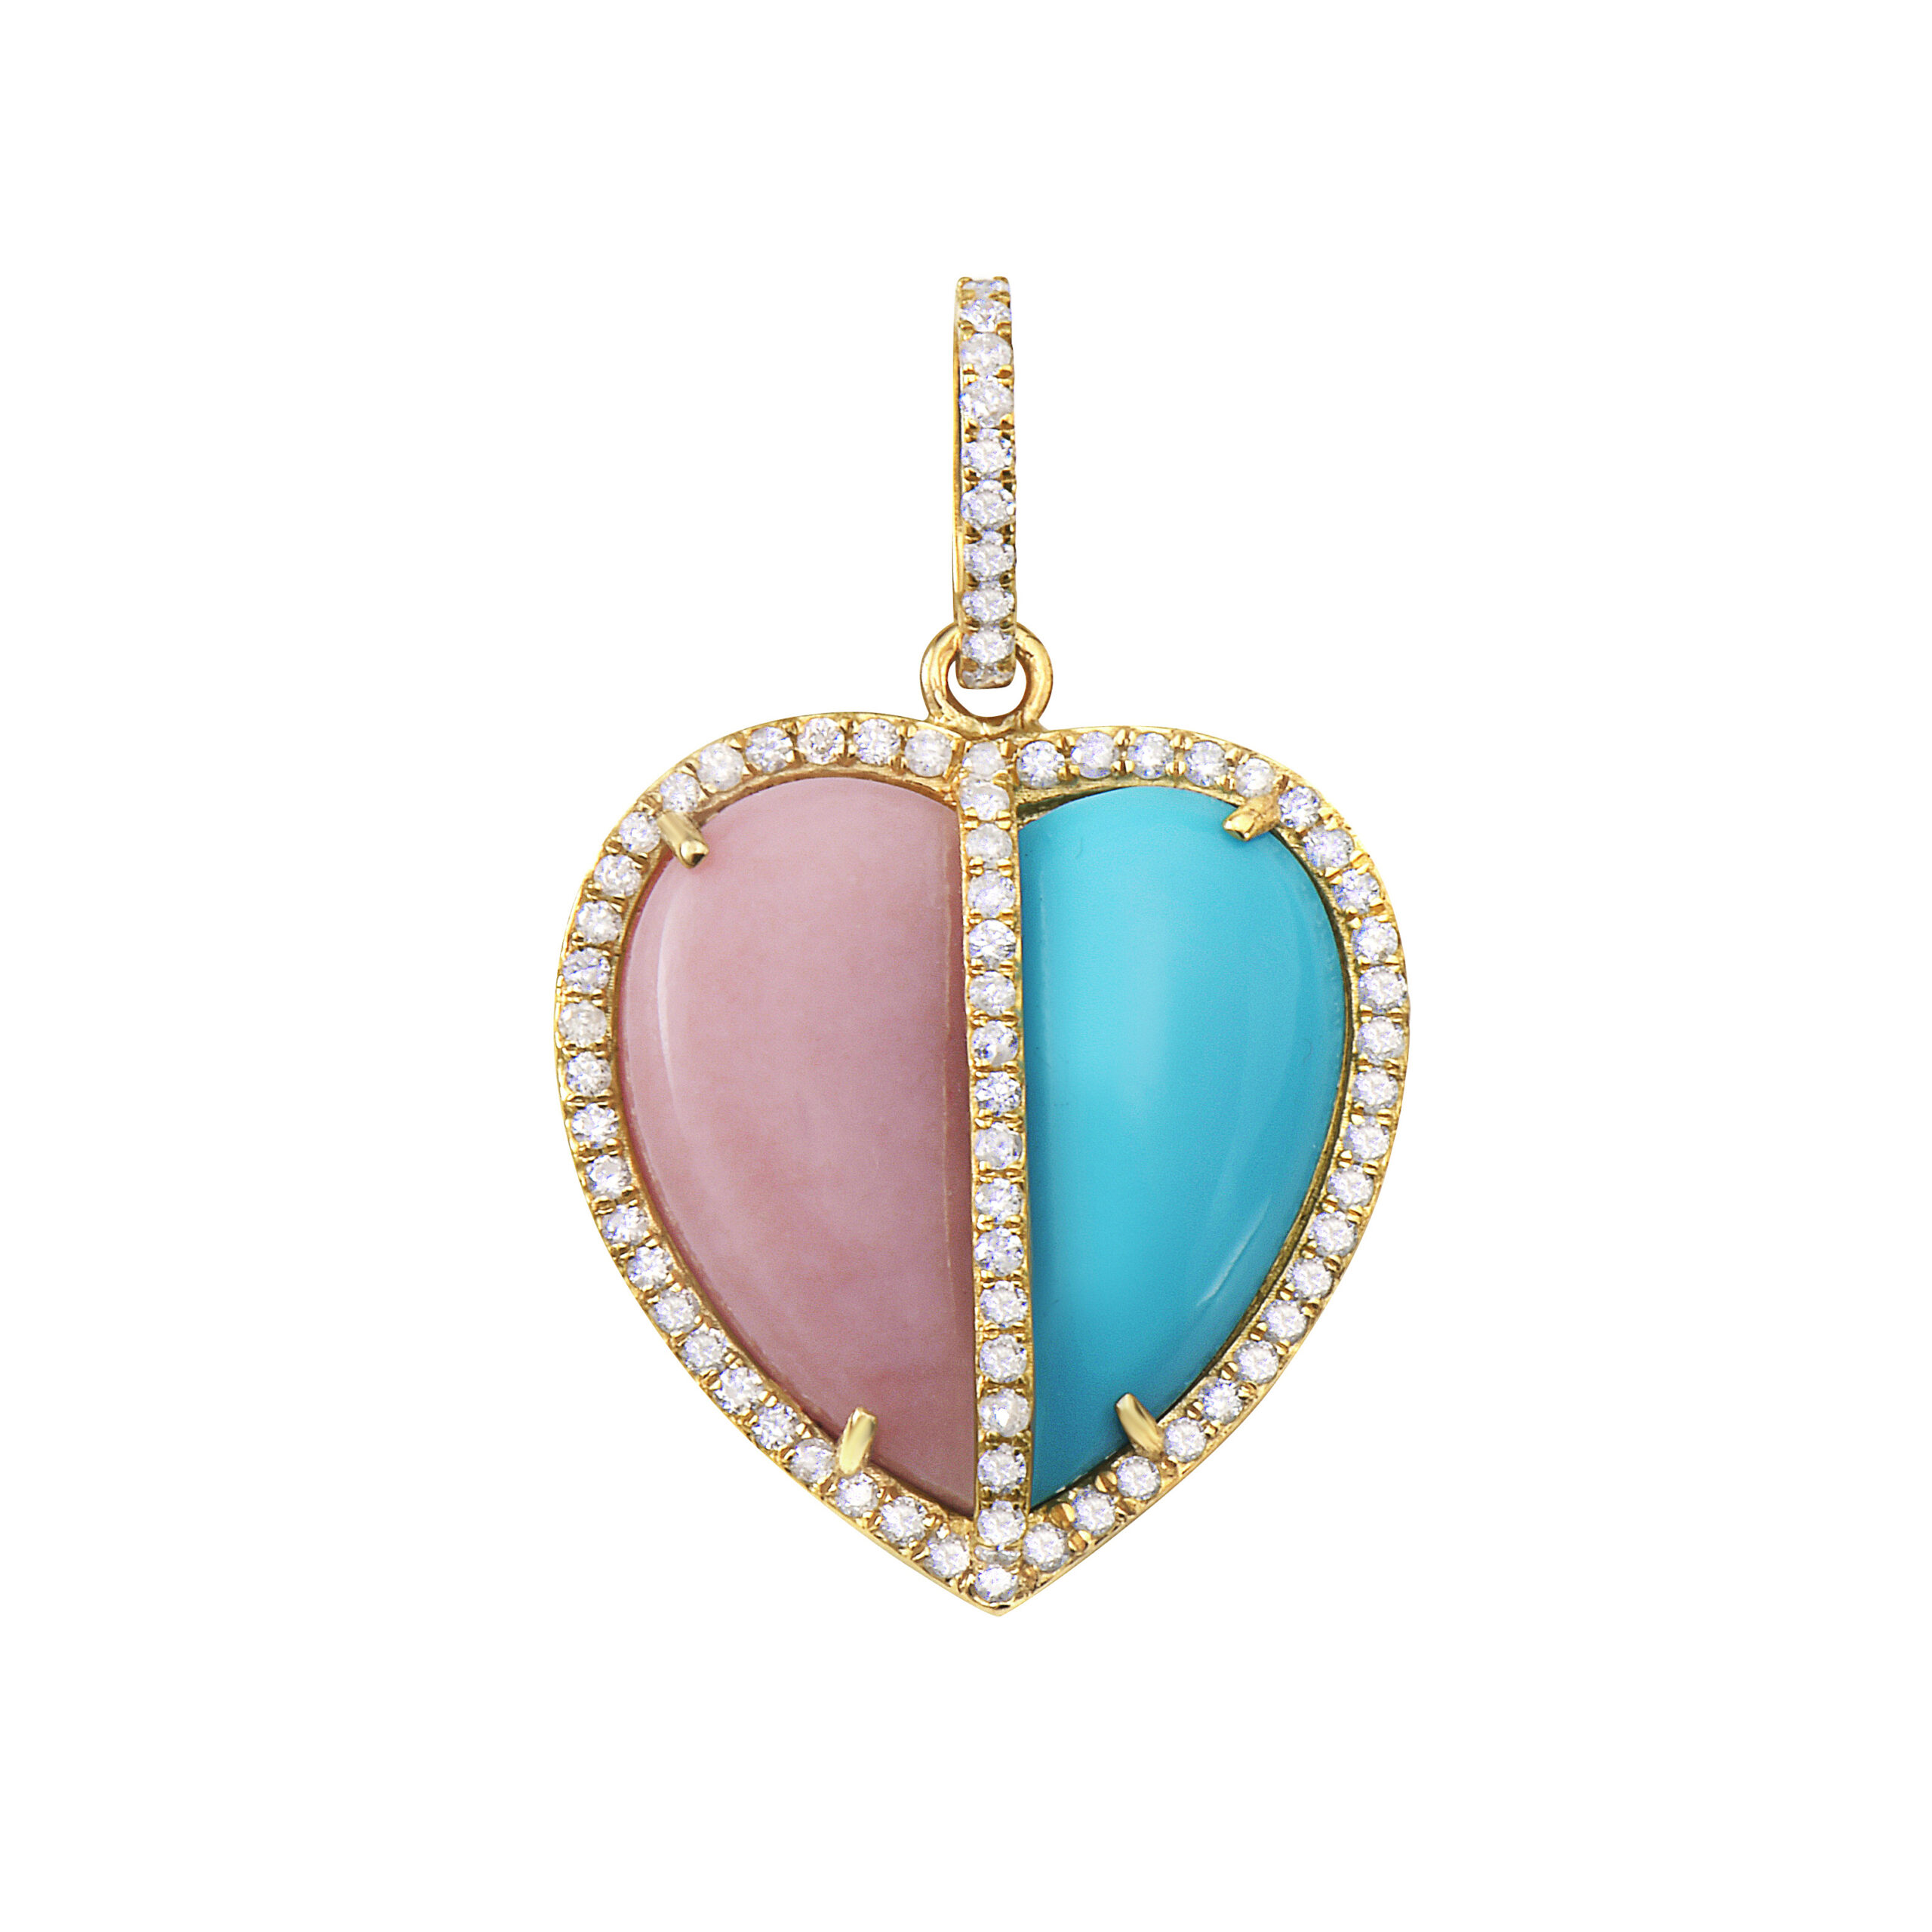 Mon Coeur Heart Charm in 14K Yellow Gold with Diamonds, Turquoise, And Pink Opal